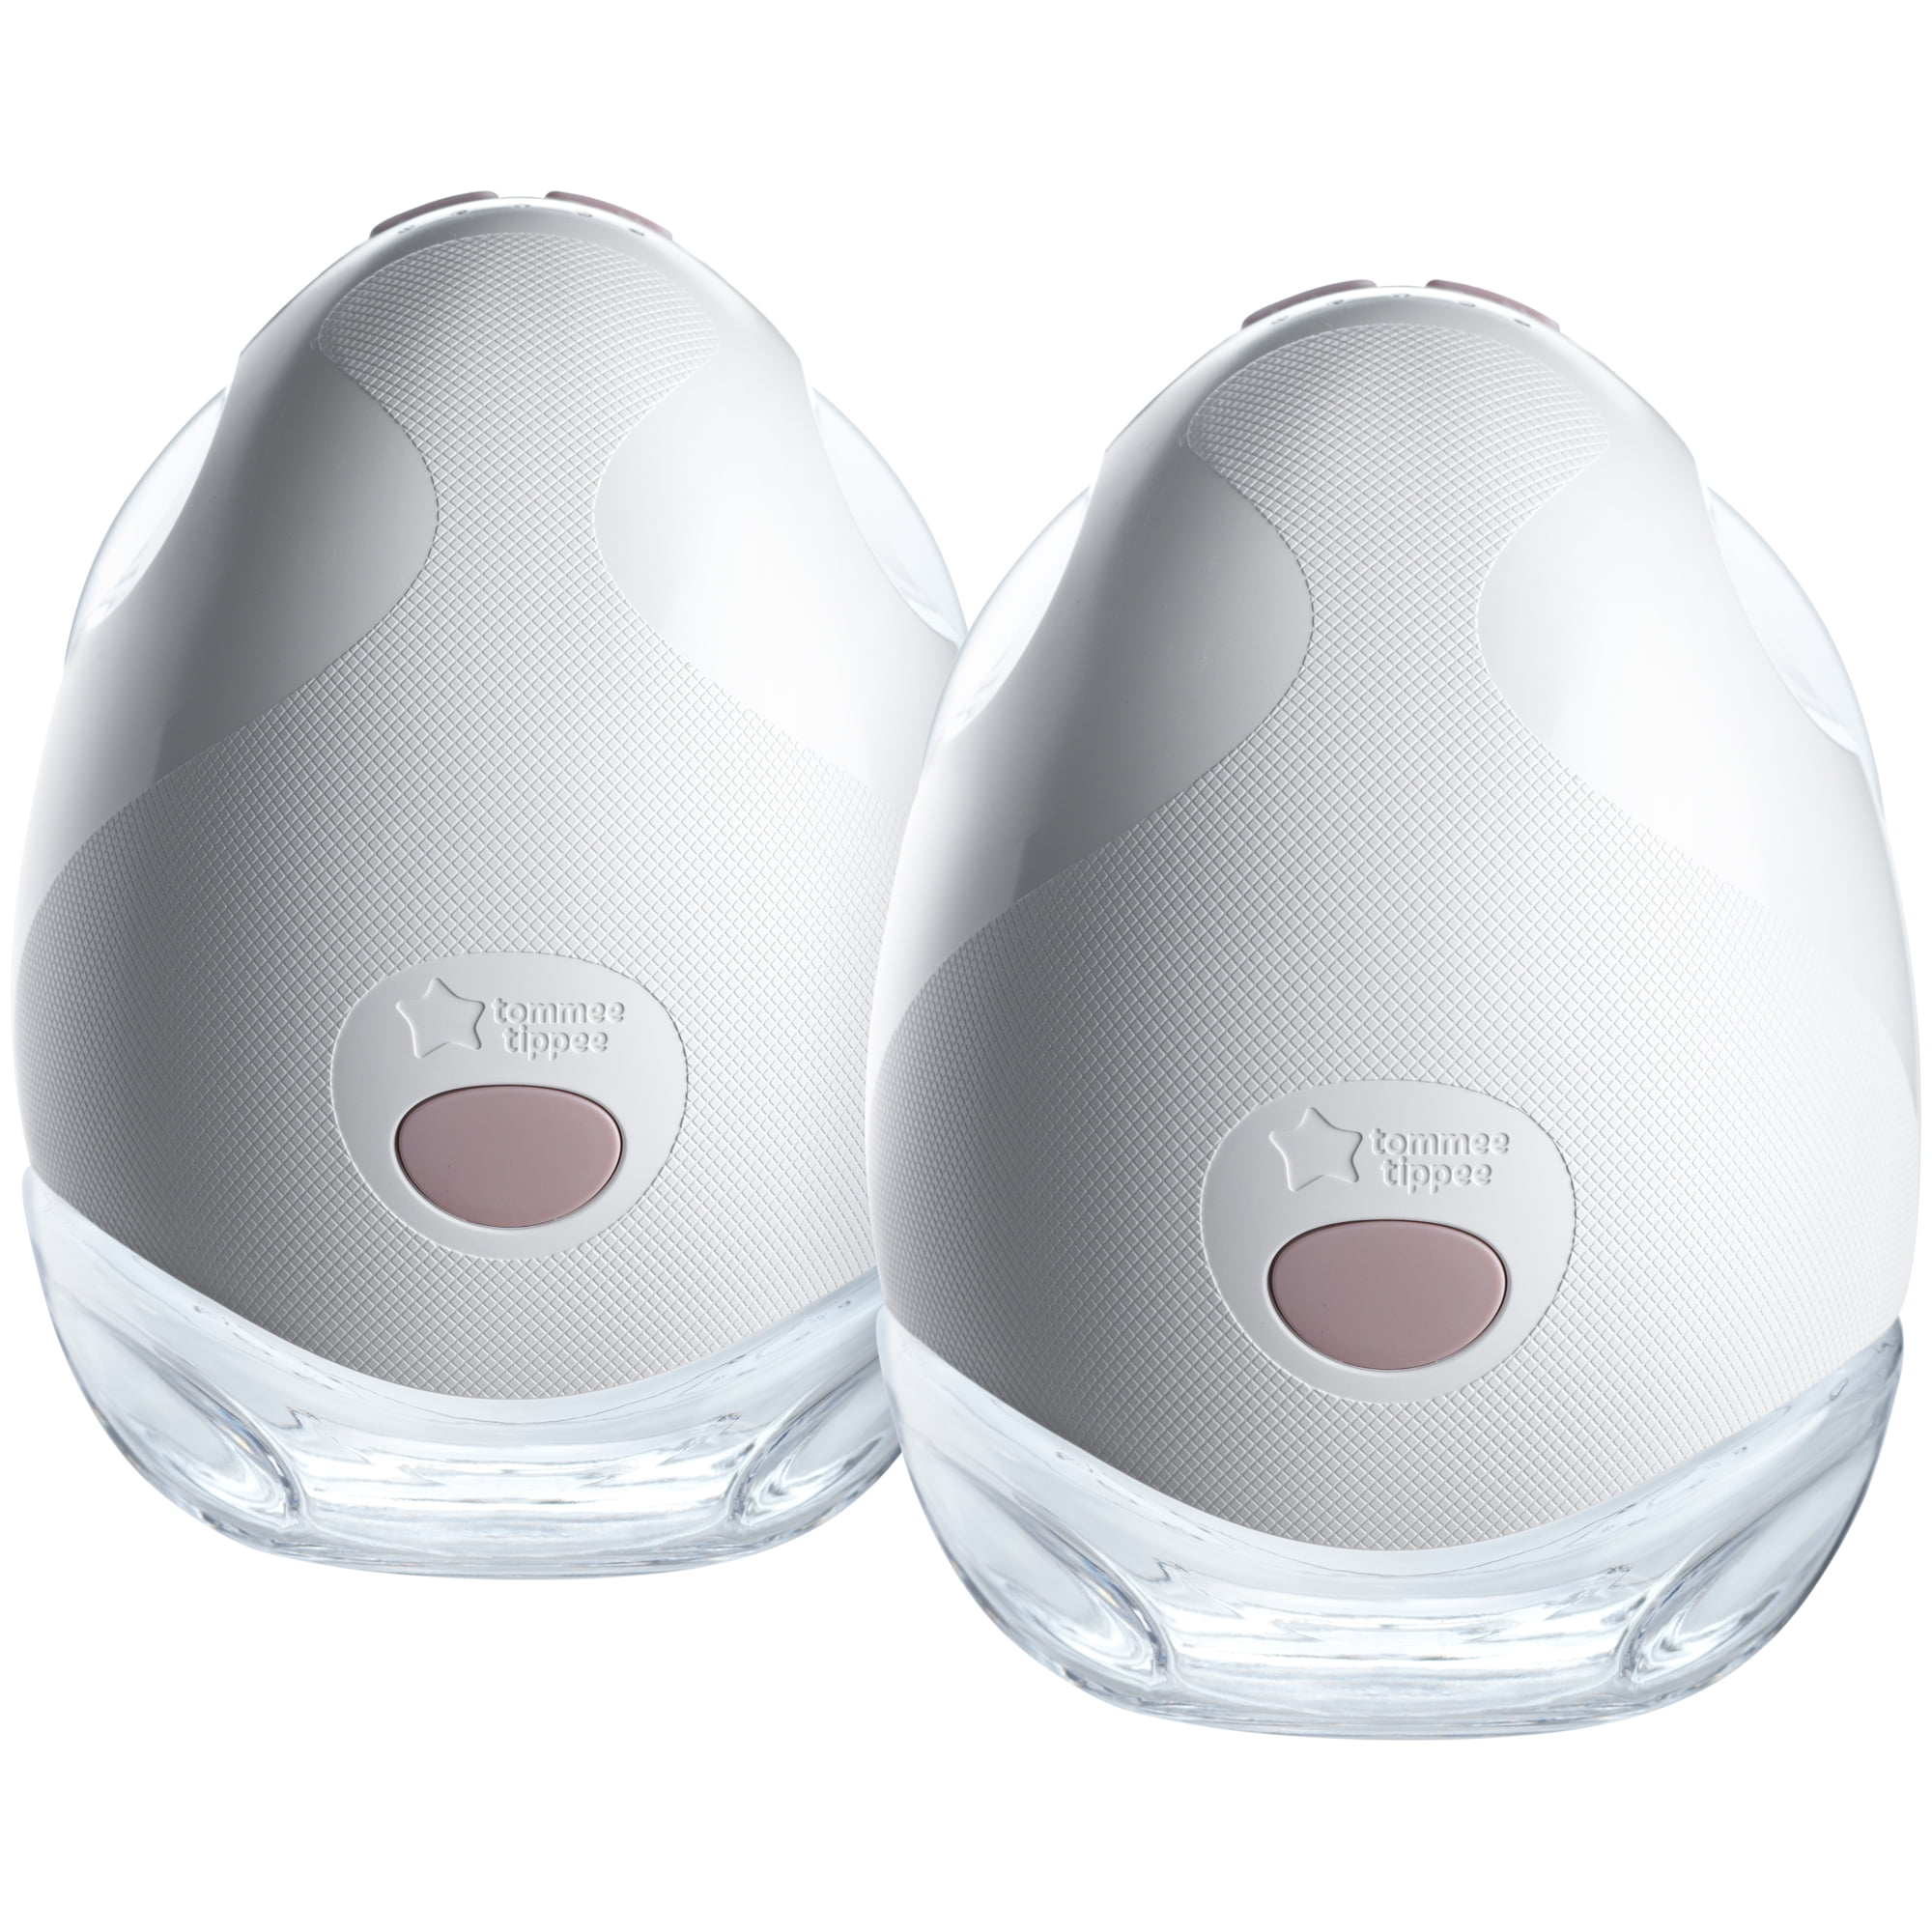 Tommee Tippee Made For Me Double Electric Wearable Breast Pump In Bra